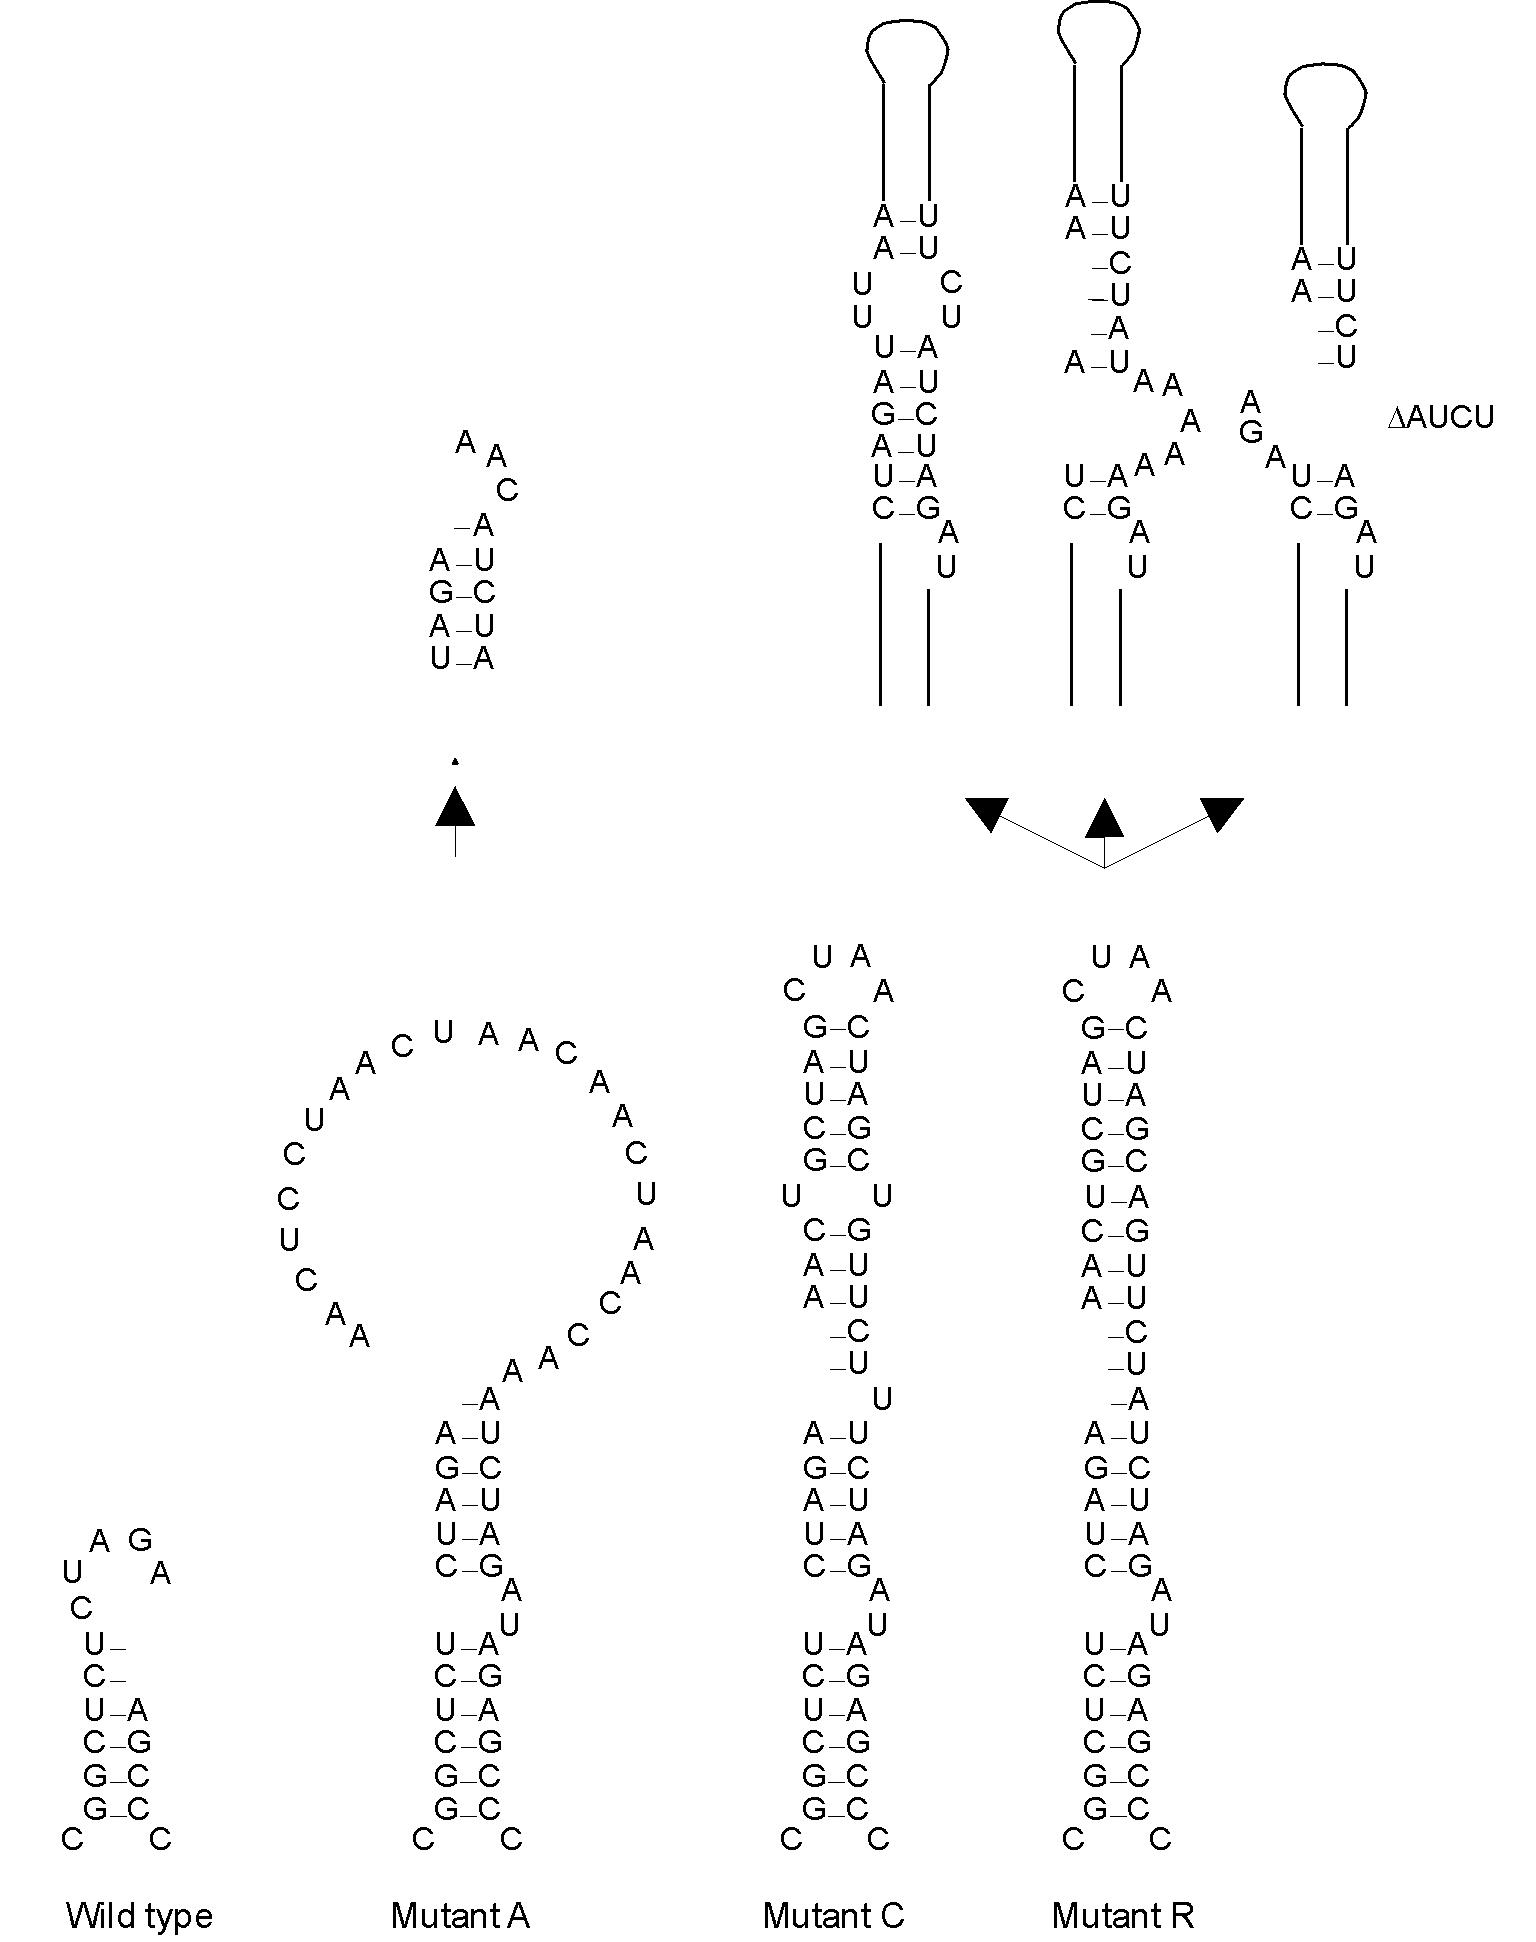 Acceptance or rejection of various RNA structure elements introduced in a non-coding region of MS2. At the left we show the wild-type structure, containing the stopcodon (UAG italics) of the maturation gene. Mutant A has been given a big unstructured loop that is almost fully deleted during passaging (double arrows). Mutant C, containing a nearly perfect hairpin extension, is genetically stable for many generations. Mutant R with the perfect hairpin extension is an RNase III substrate. In RNase III-deficient strains the stem is genetically stable but in wild-type E. coli suppressor mutations occur that make the stem RNase III resistant (bold italics top right). We show only some representative examples of the pseudorevertants obtained.